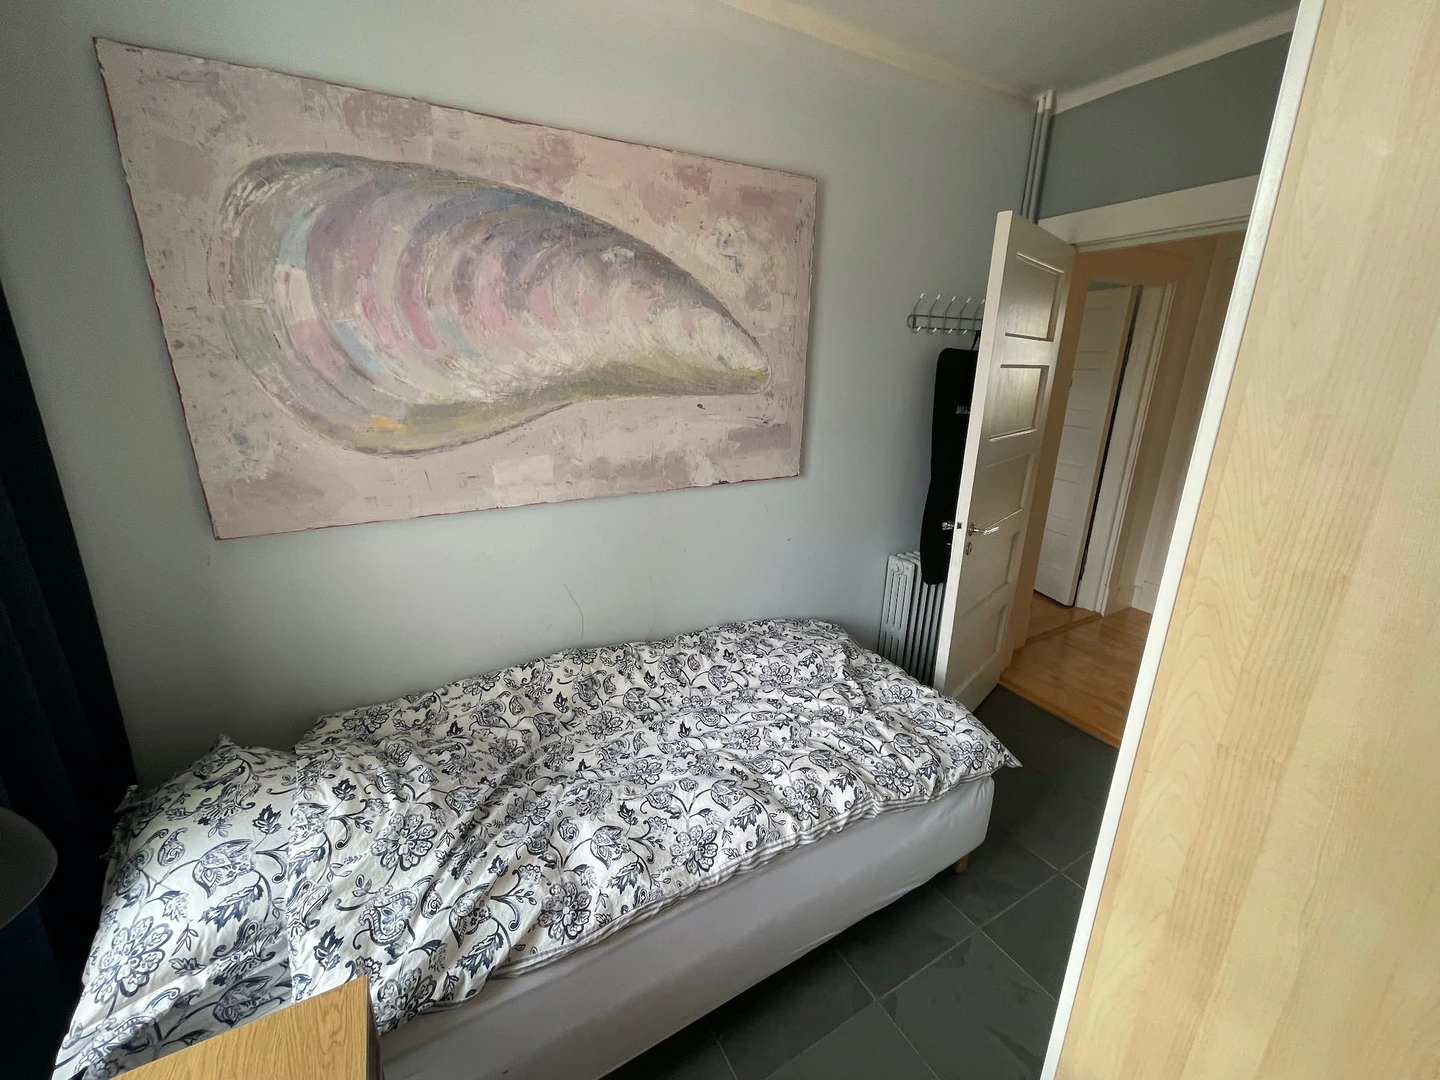 Renting rooms by the month in Reykjavík